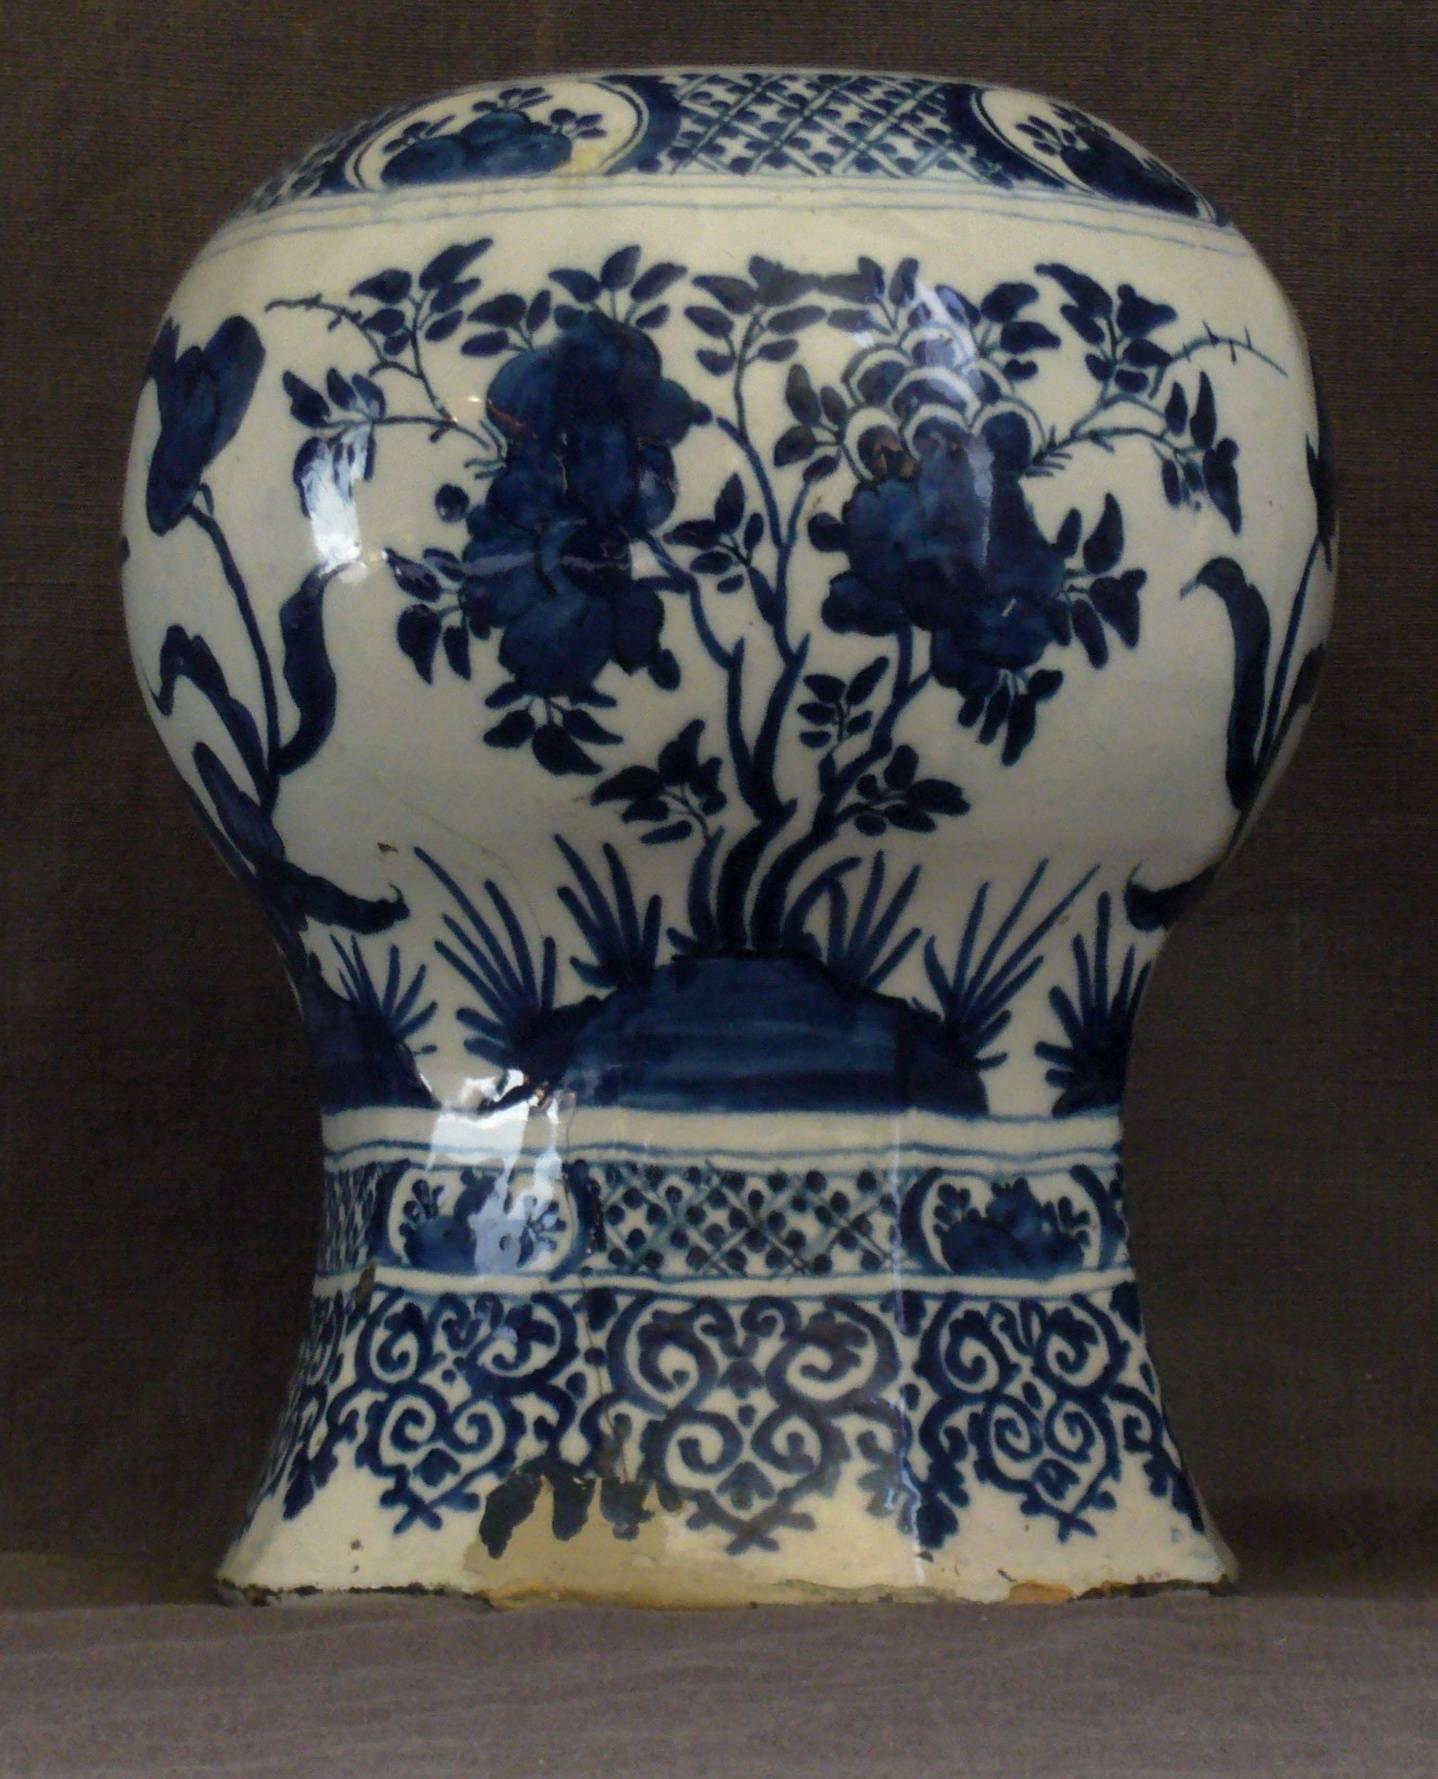 17th Century Dutch Delft blue and white vase of baluster form with bold floral decoration and borders. Netherlands, circa 1685
Dimension: 7